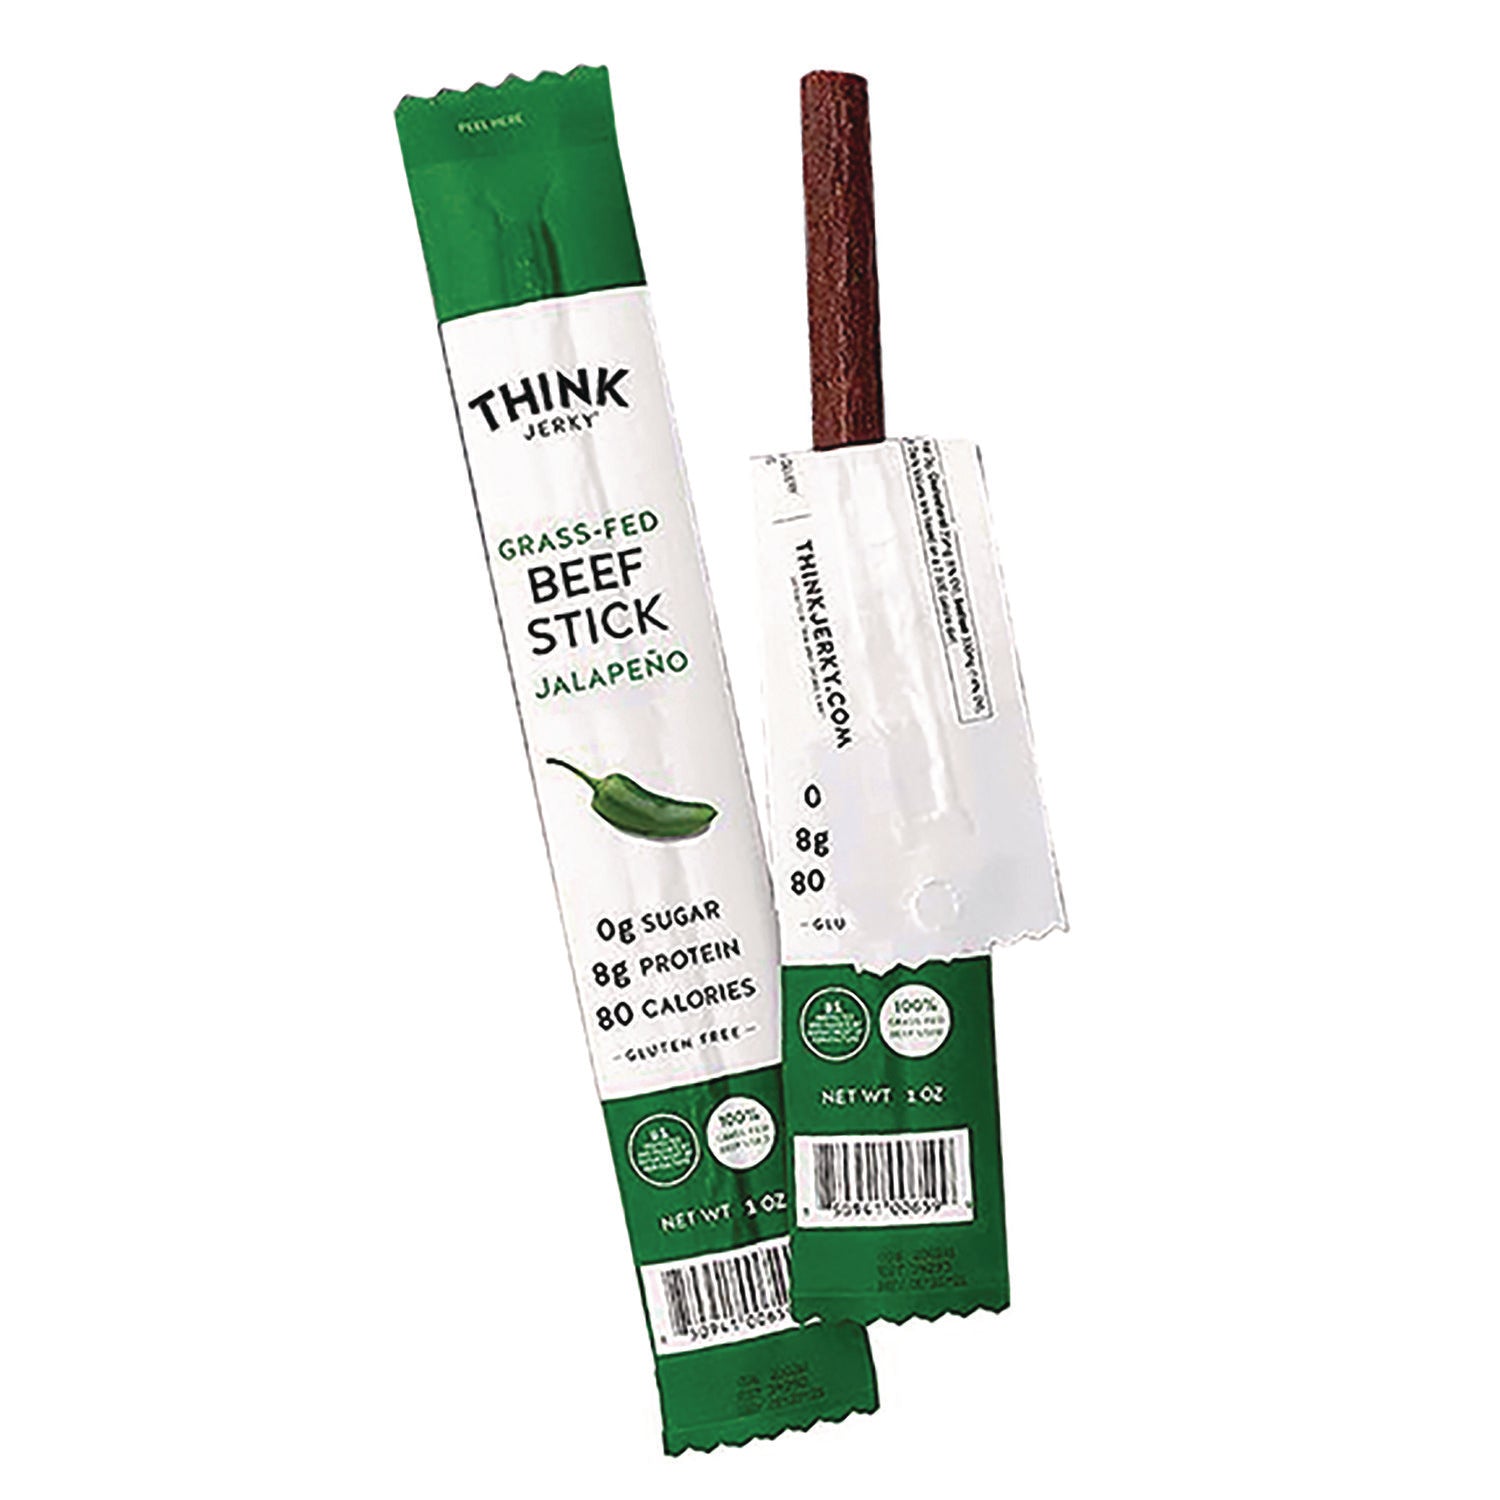 jalapeno-100%-grass-fed-beef-sticks-1-oz-individually-wrapped-sticks-20-carton-ships-in-1-3-business-days_grr33700003 - 4